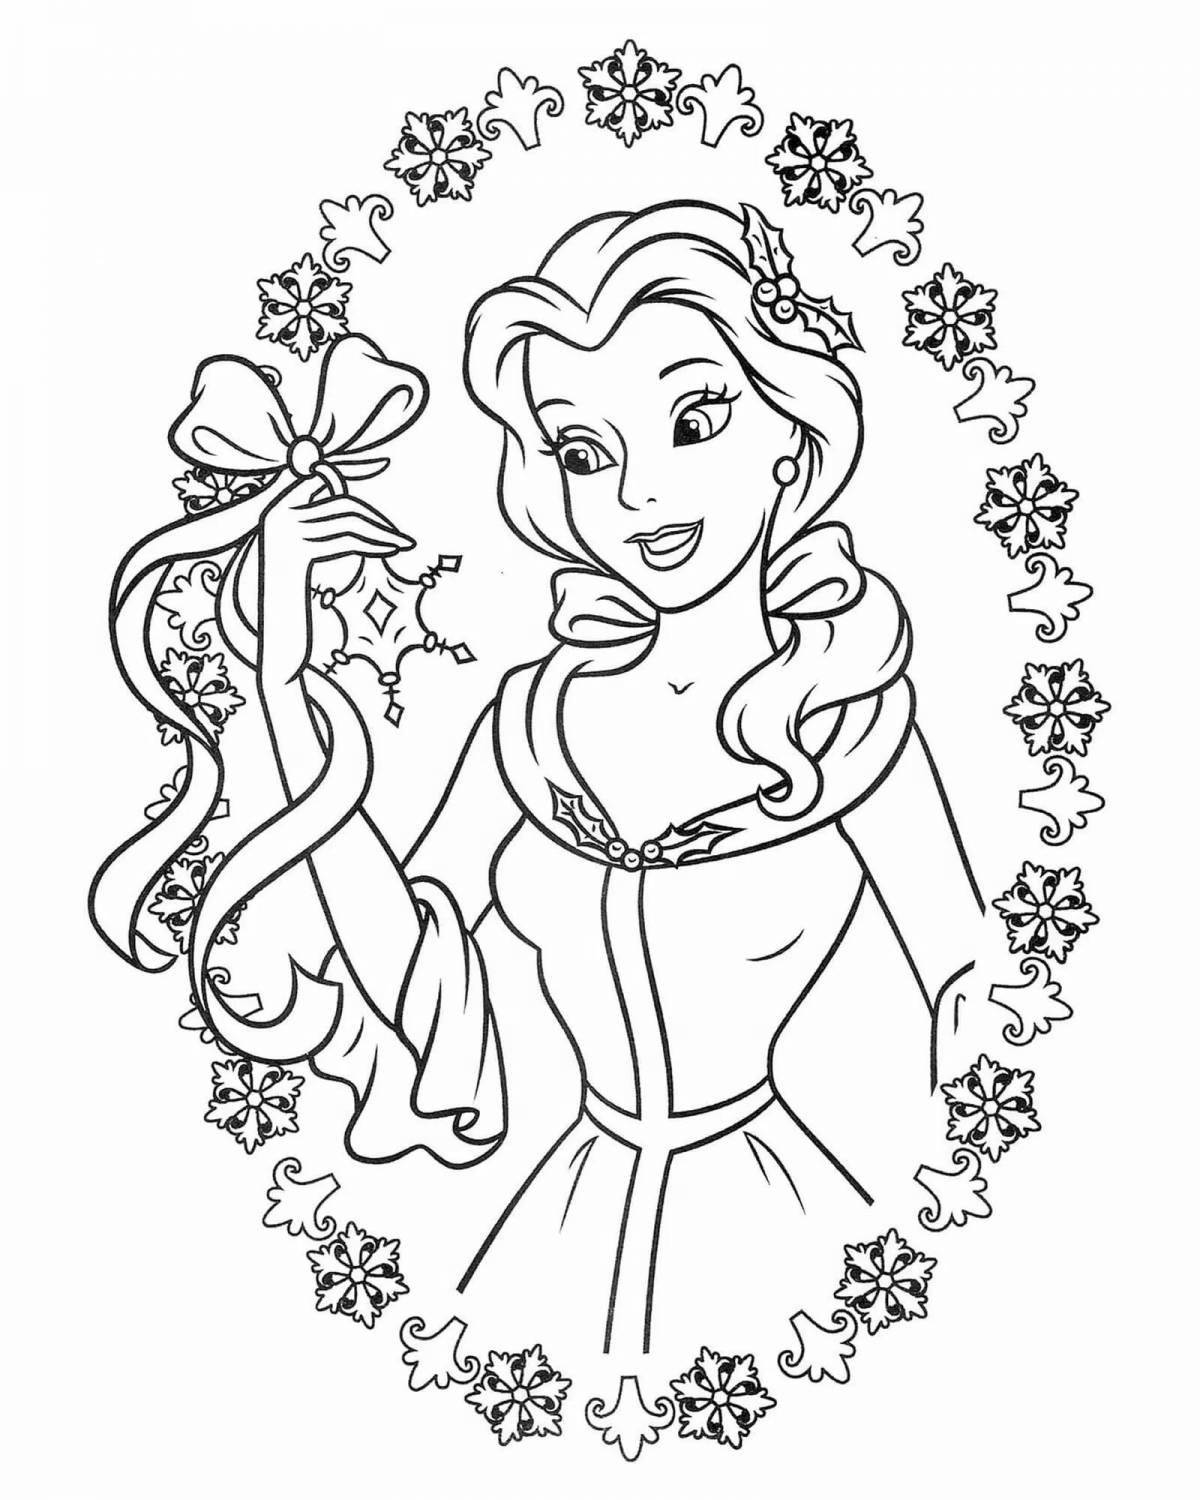 Glamor underwear coloring page